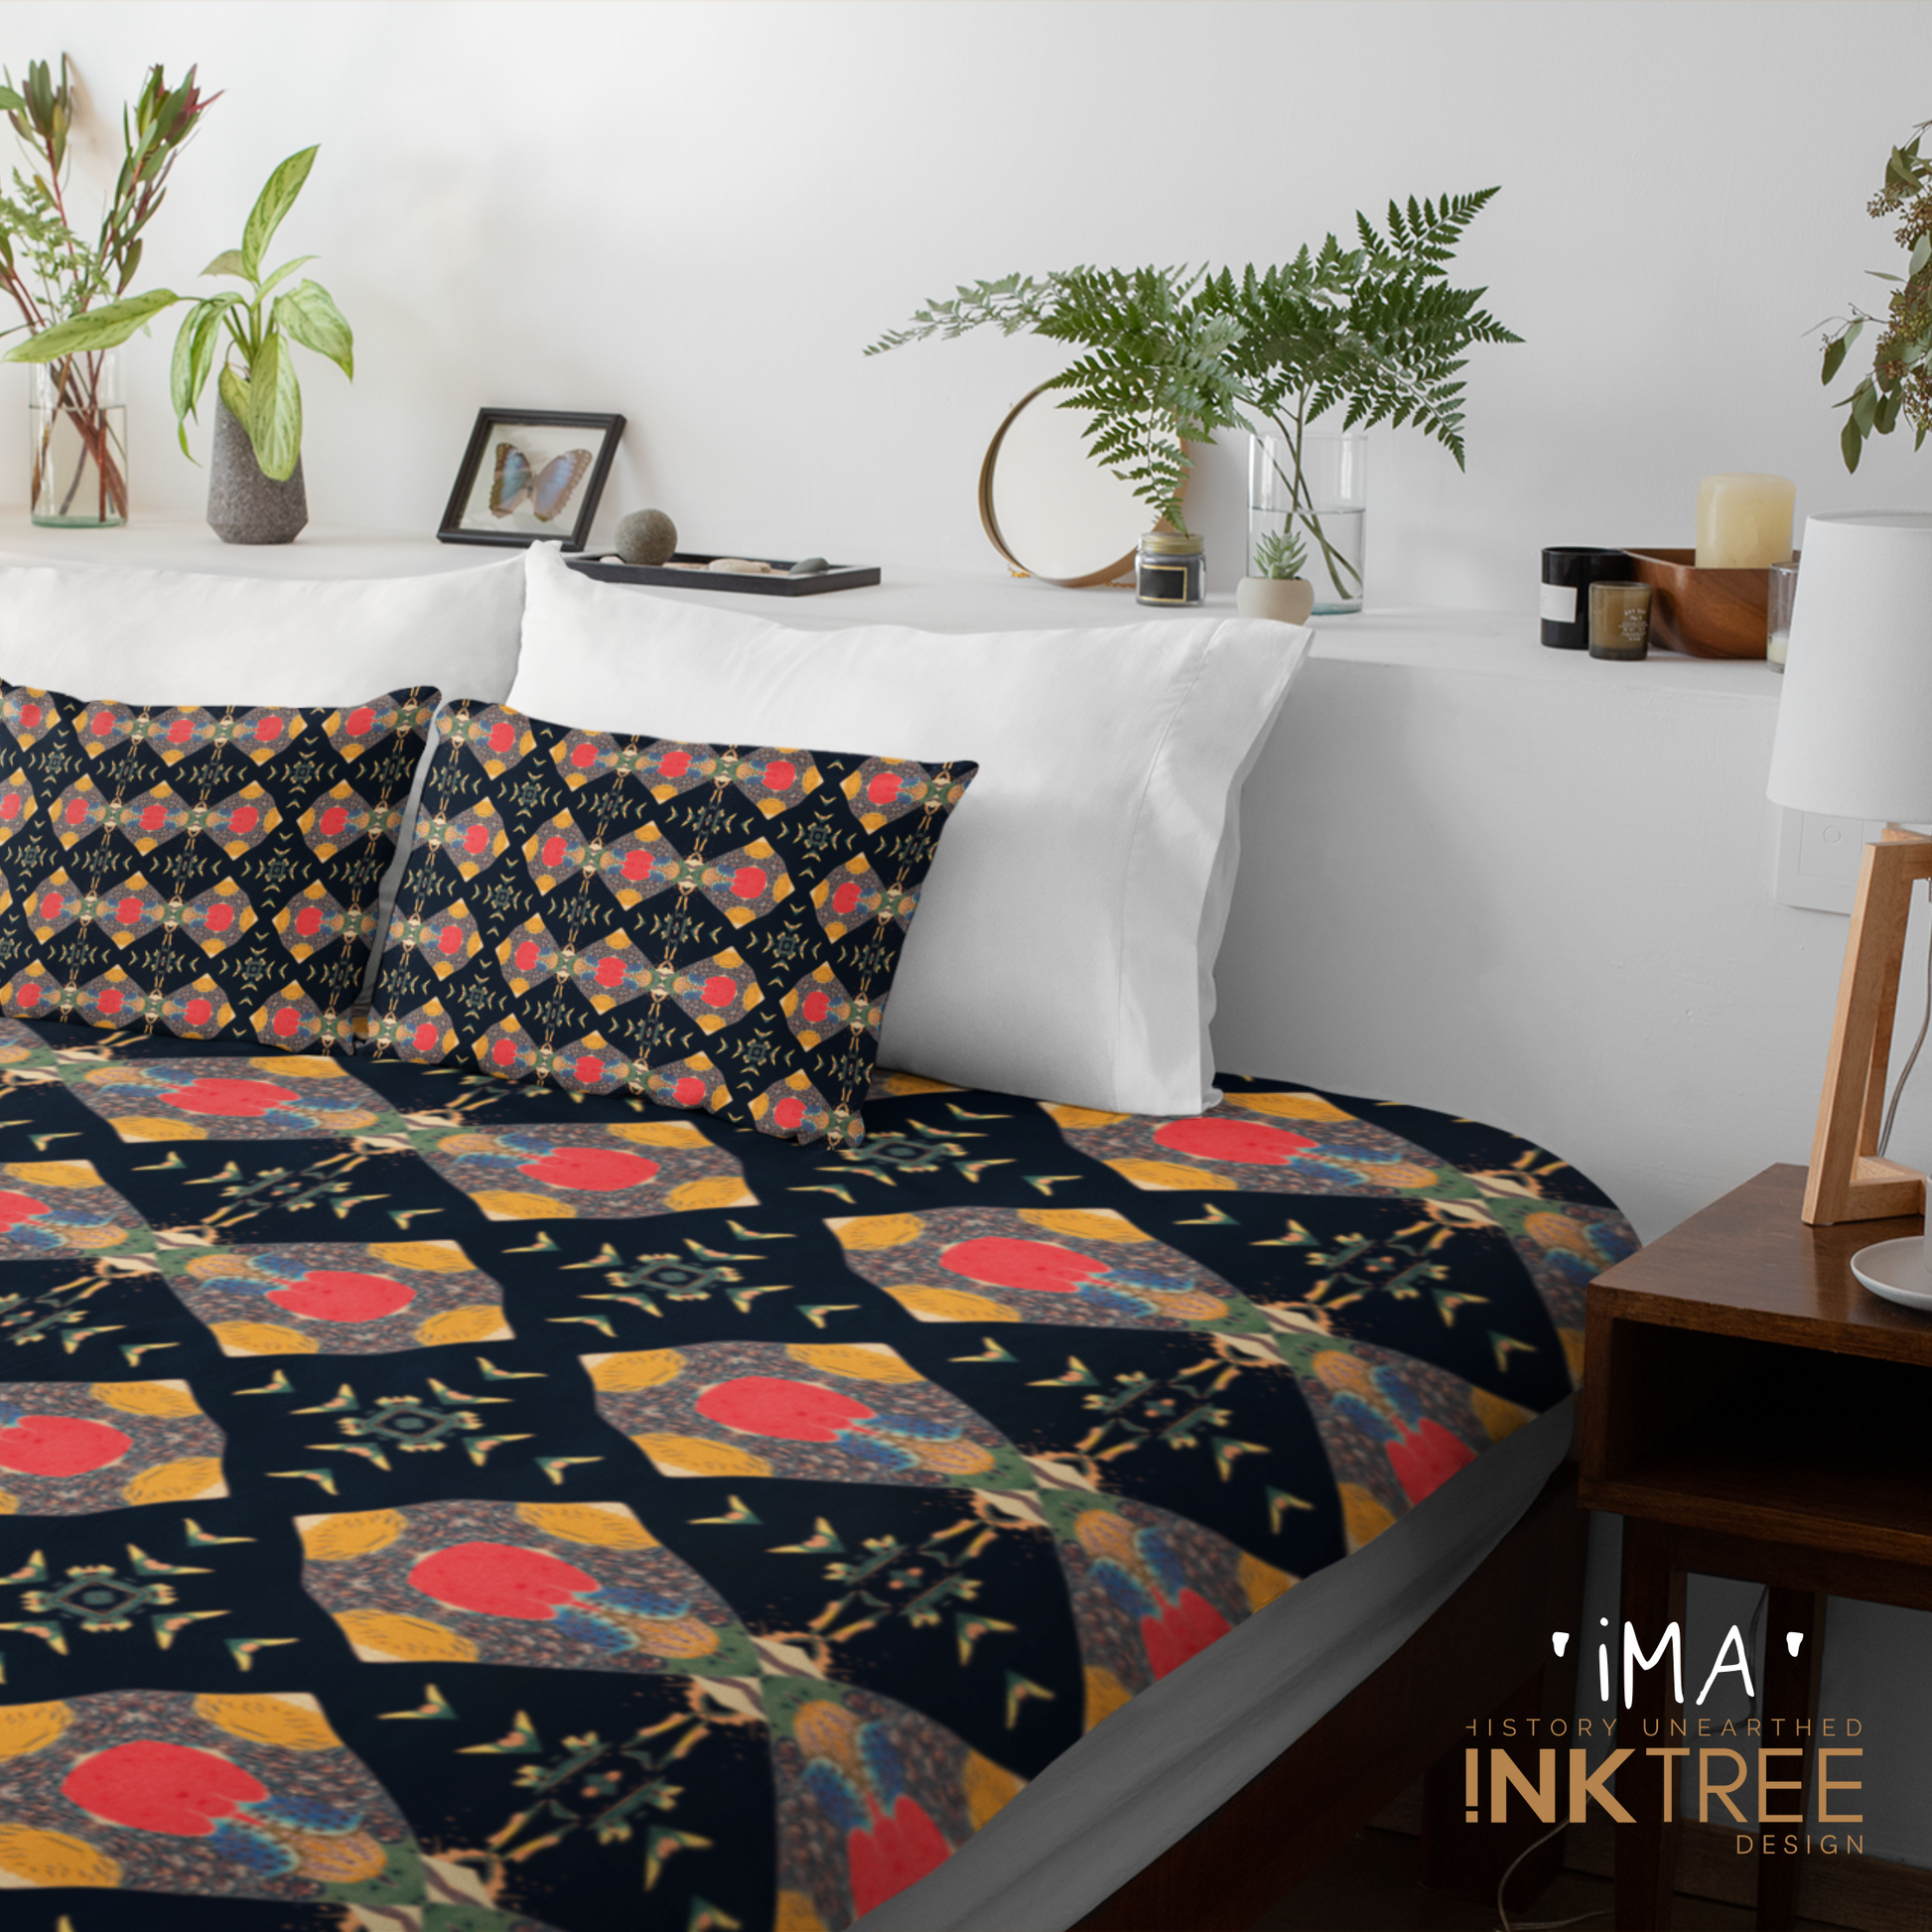 A quilt or doona cover and front pillows with a gold, black, blue, red, green and white oriental looking pattern on a bed with a white wall, white pillows and white backboard background. There is a lamp with a white shade and wood base and plants and a small round metal mirror on the back board. There is also a ima, history unearthed ink tree design logo in the bottom right hand corner on it.